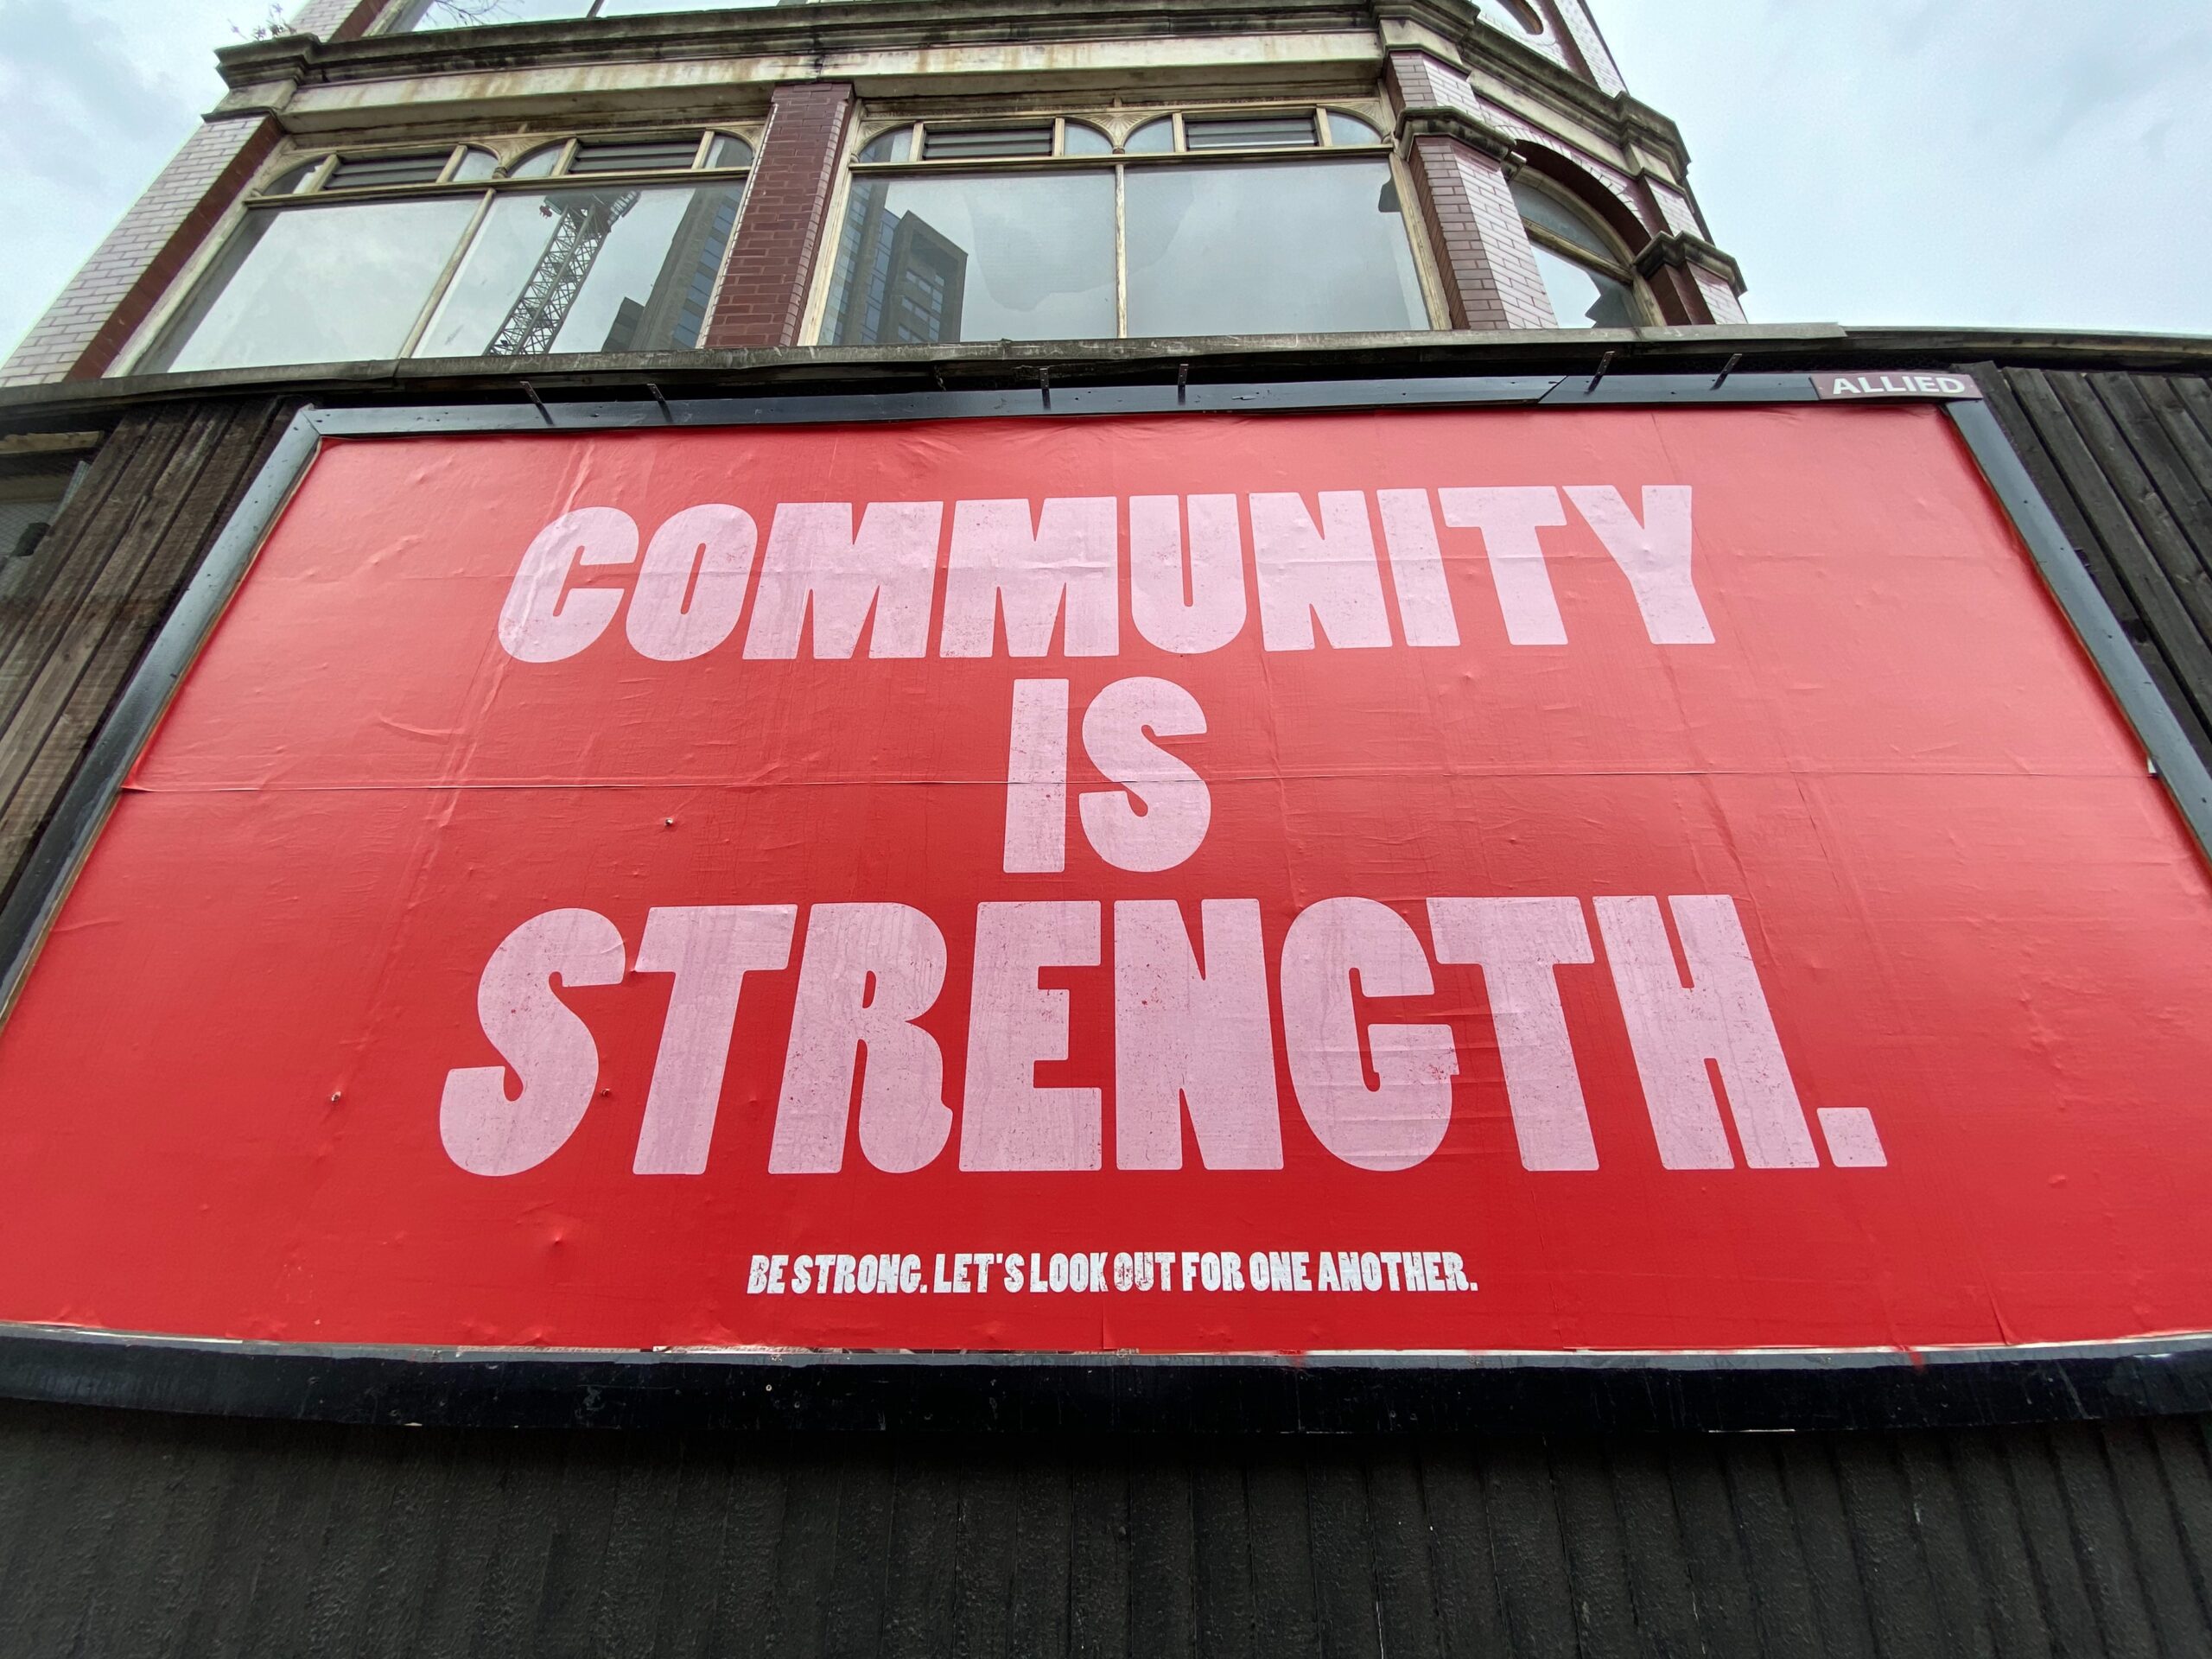 A large red sign on a wall, with two windows of a building visible behind it. The sign says "Community is Strength."